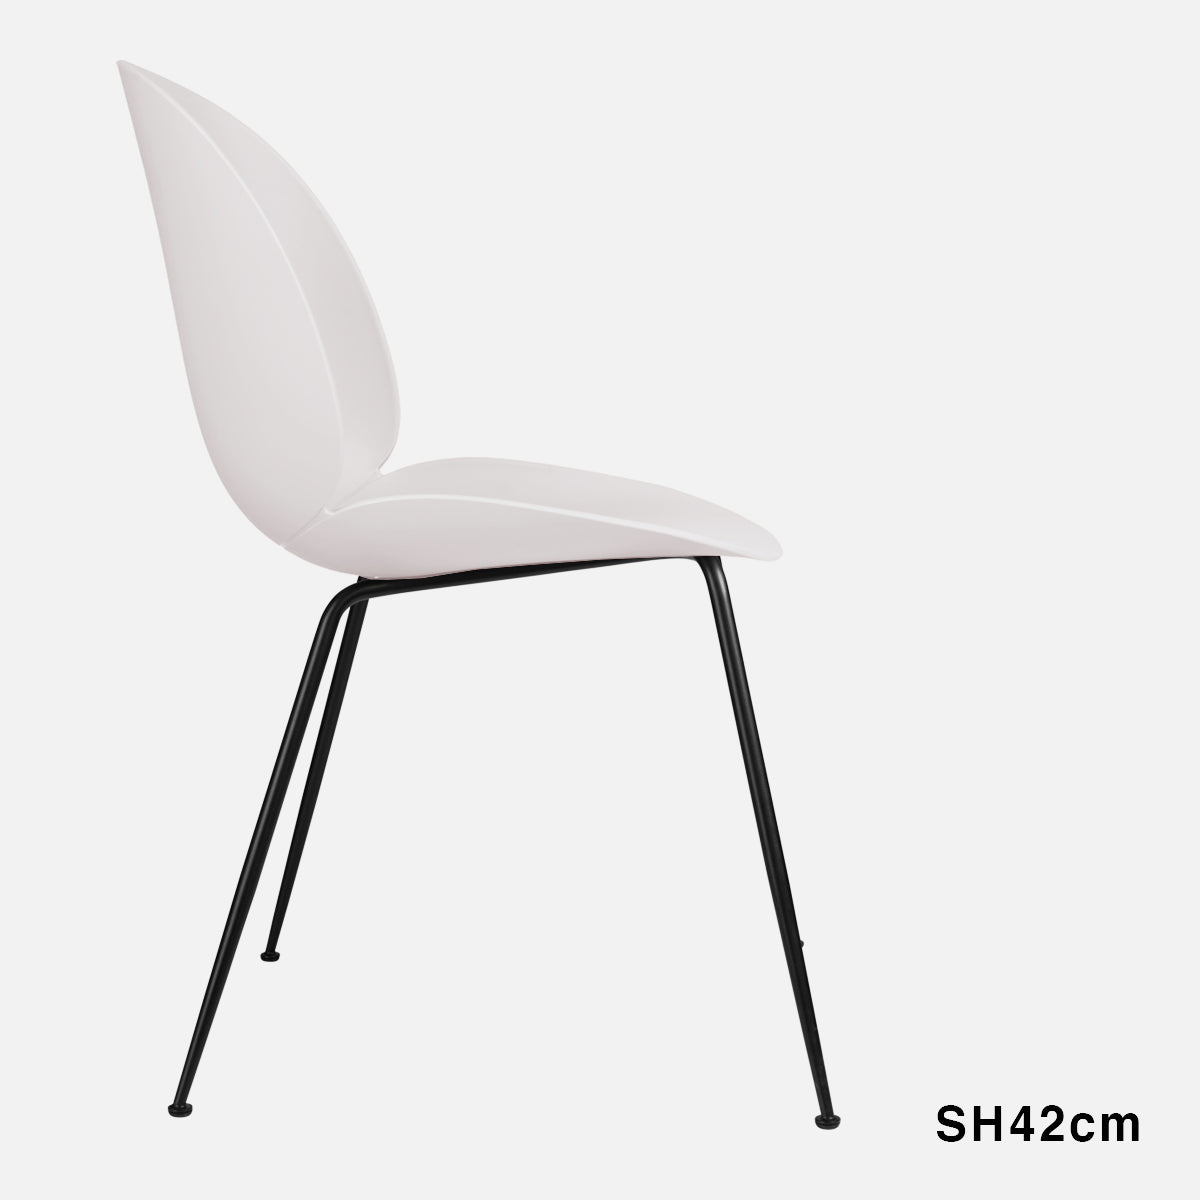 Beetle Chair Un-upholstered White Conic Base Black 42cm